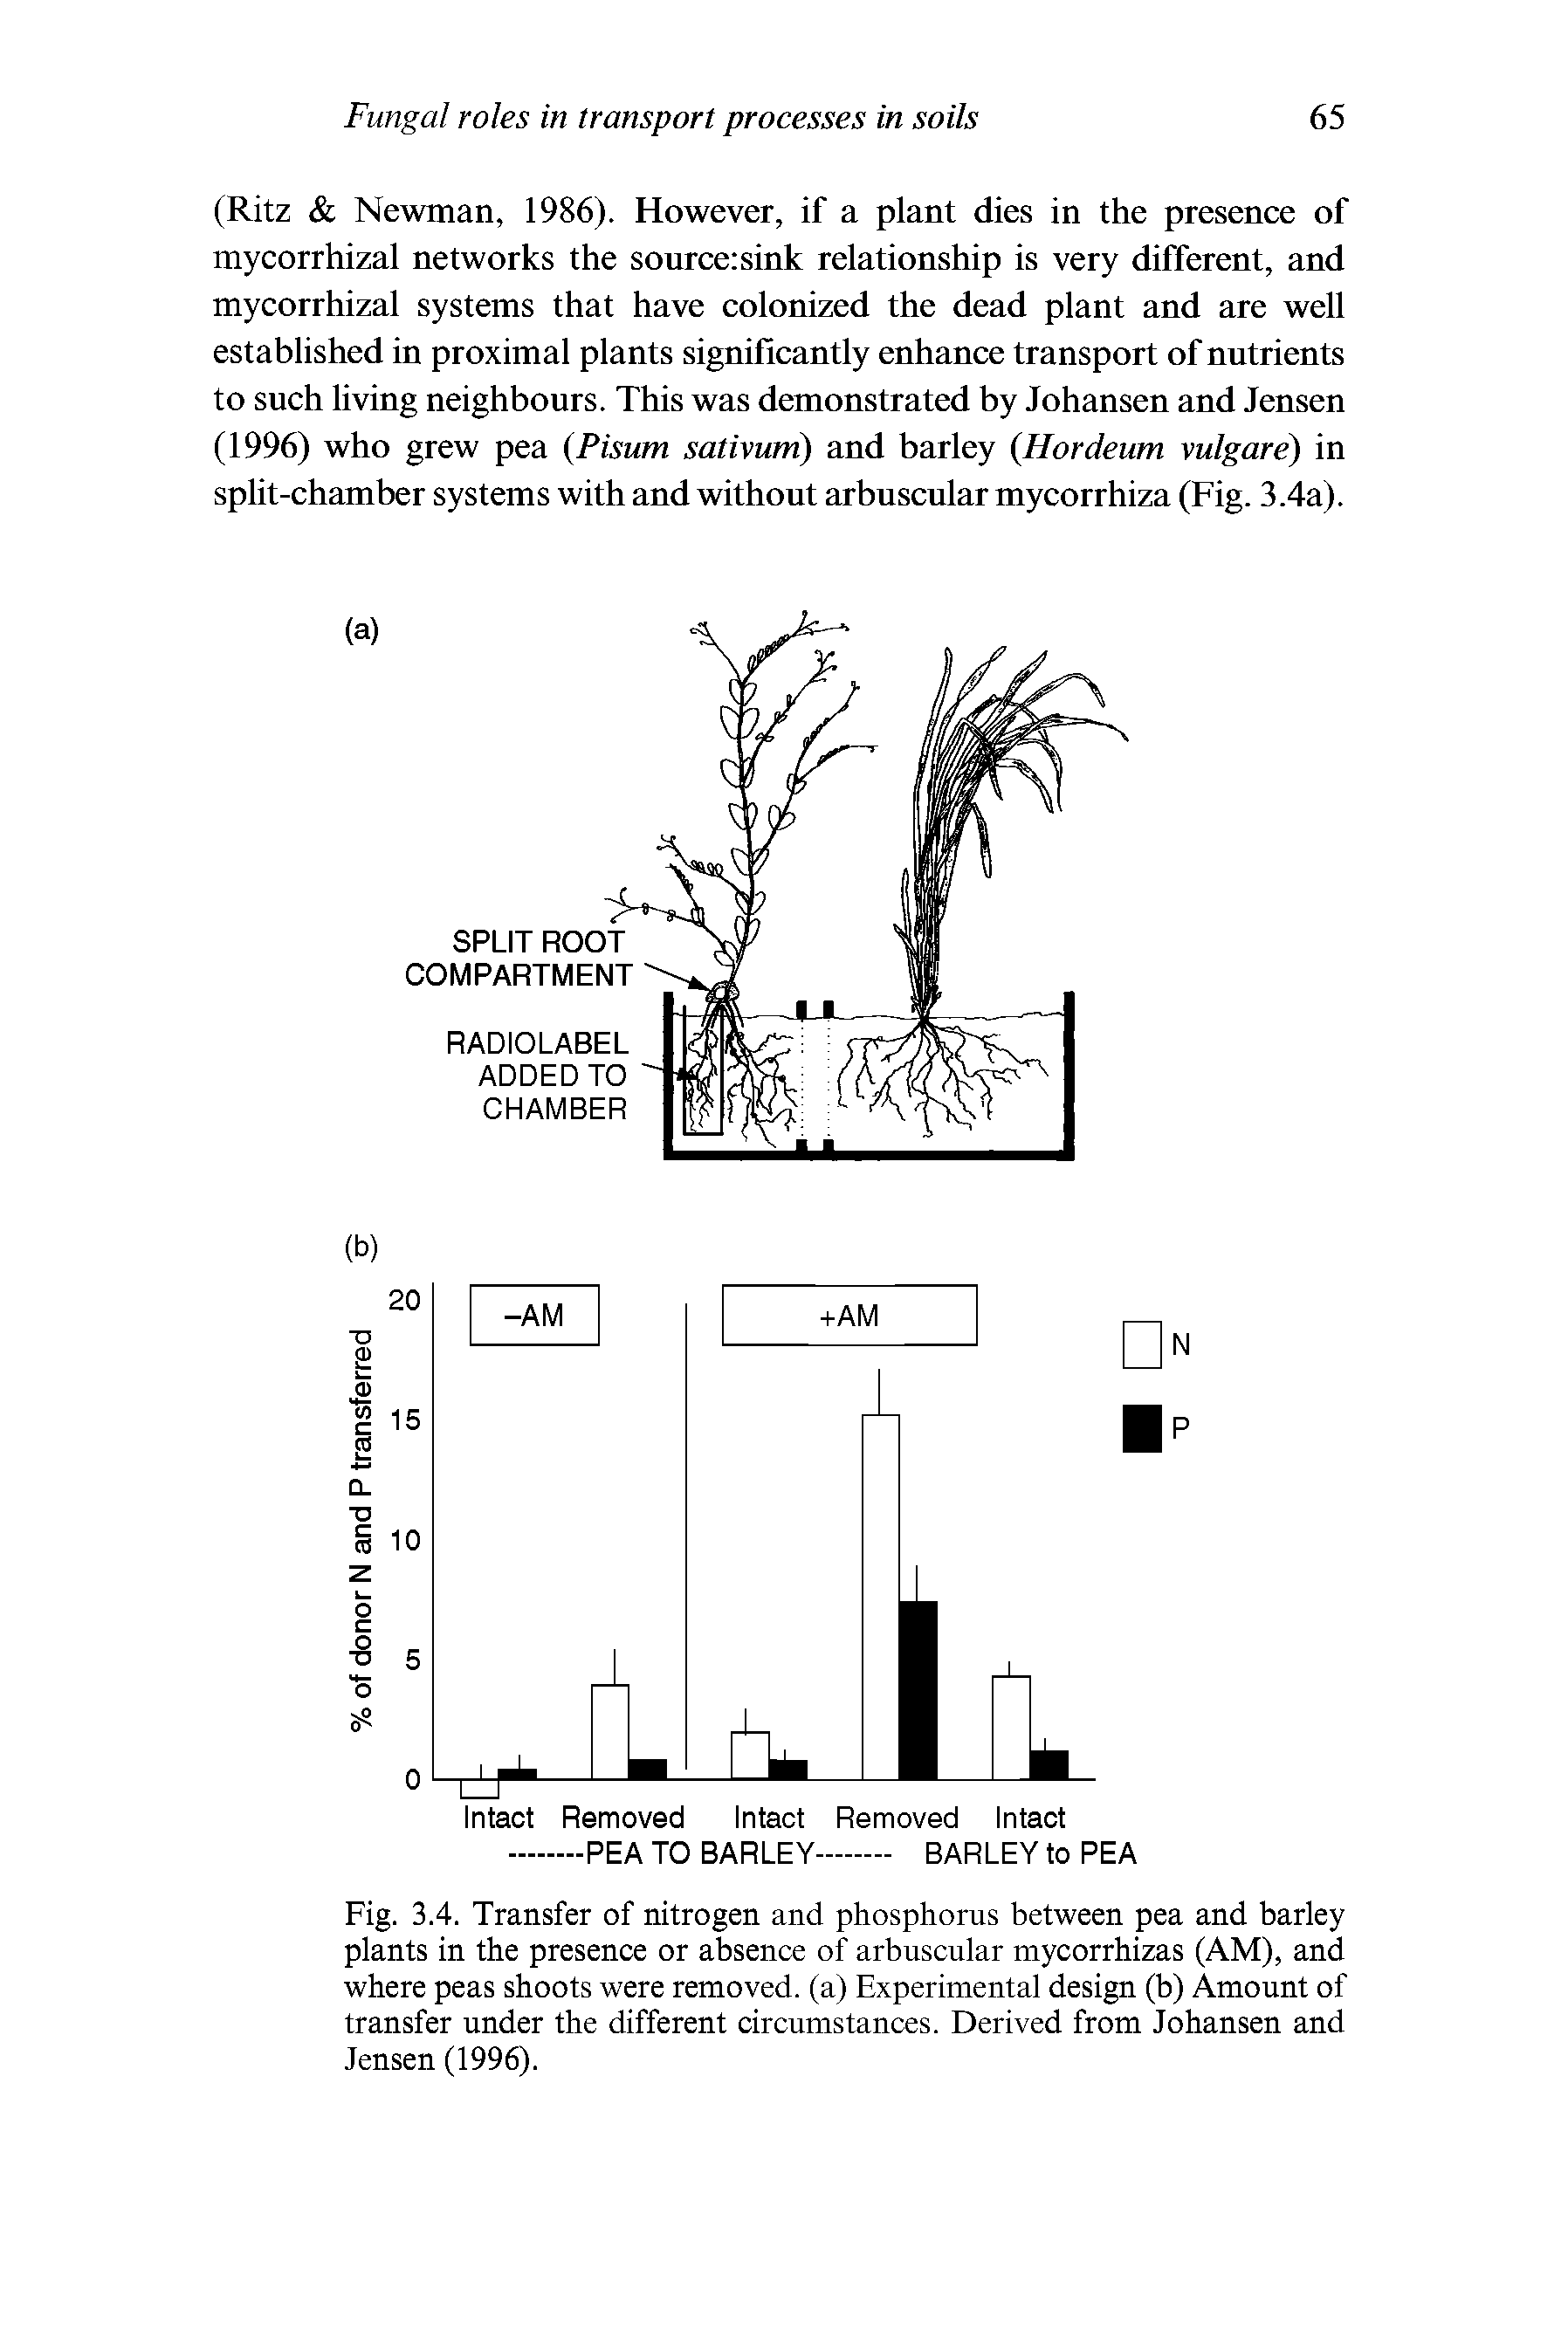 Fig. 3.4. Transfer of nitrogen and phosphorus between pea and barley plants in the presence or absence of arbuscular mycorrhizas (AM), and where peas shoots were removed, (a) Experimental design (b) Amount of transfer under the different circumstances. Derived from Johansen and Jensen (1996).